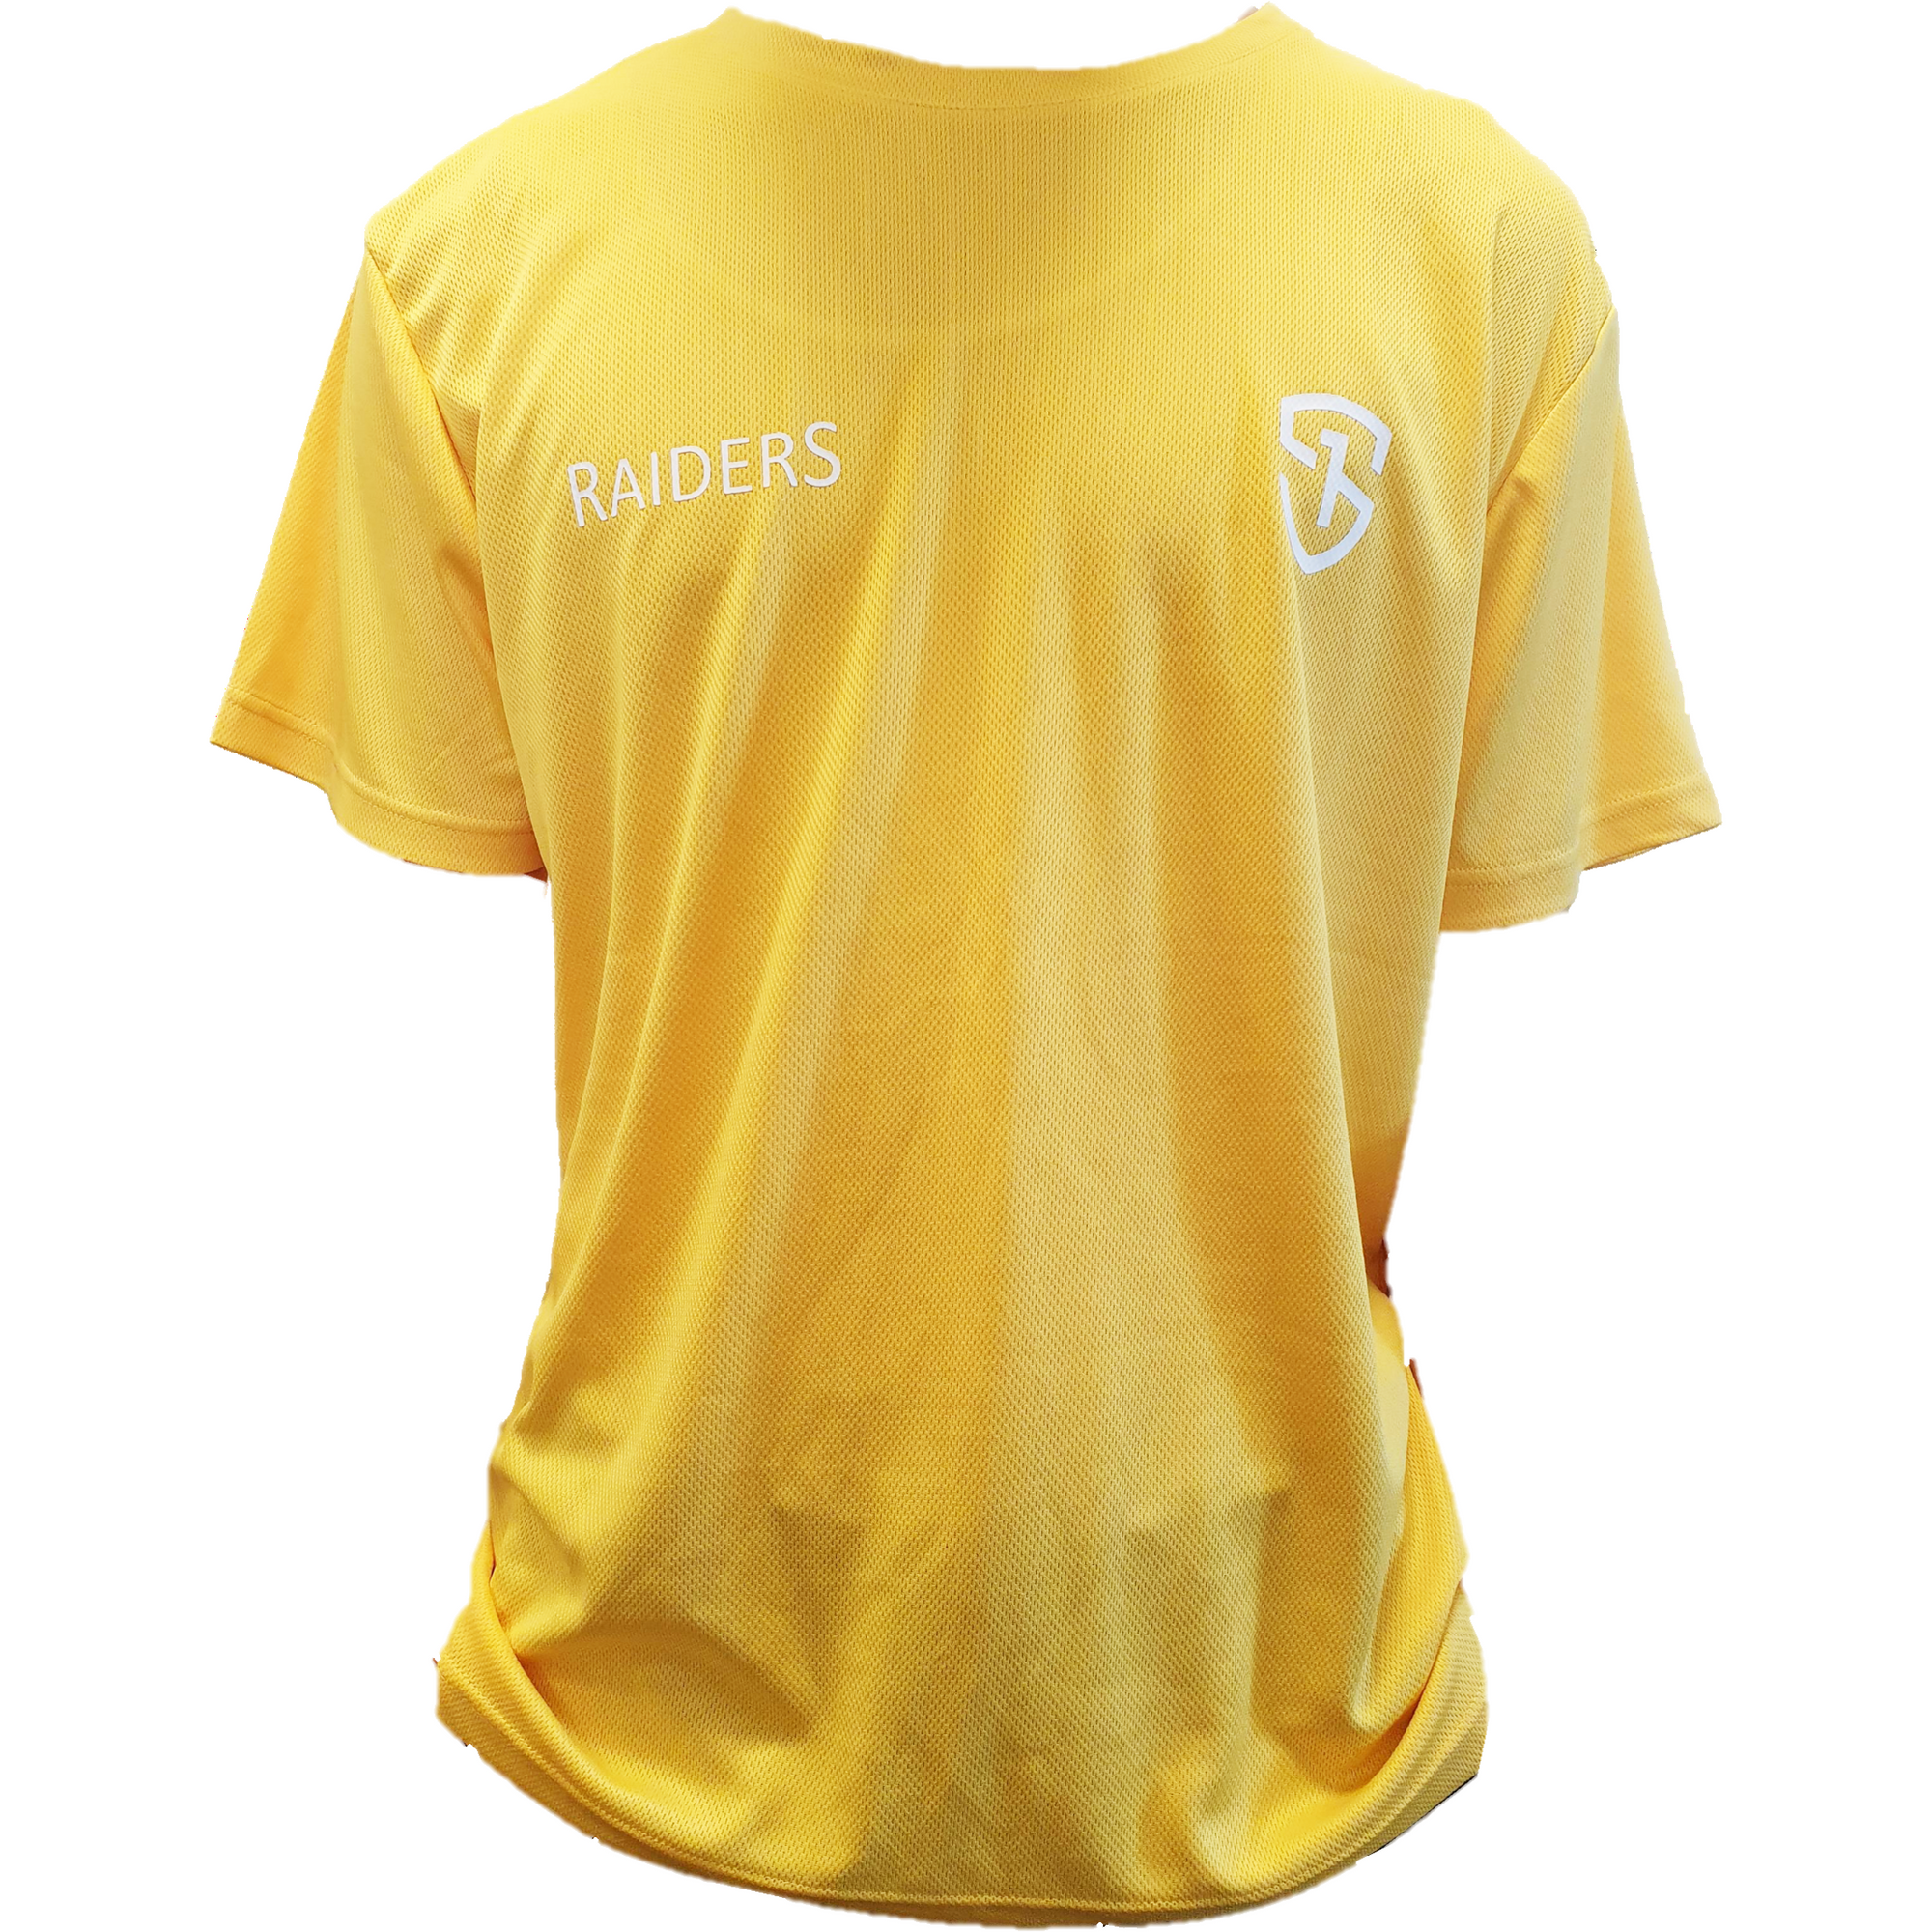 House Team Sports T-shirt Yellow Size 16